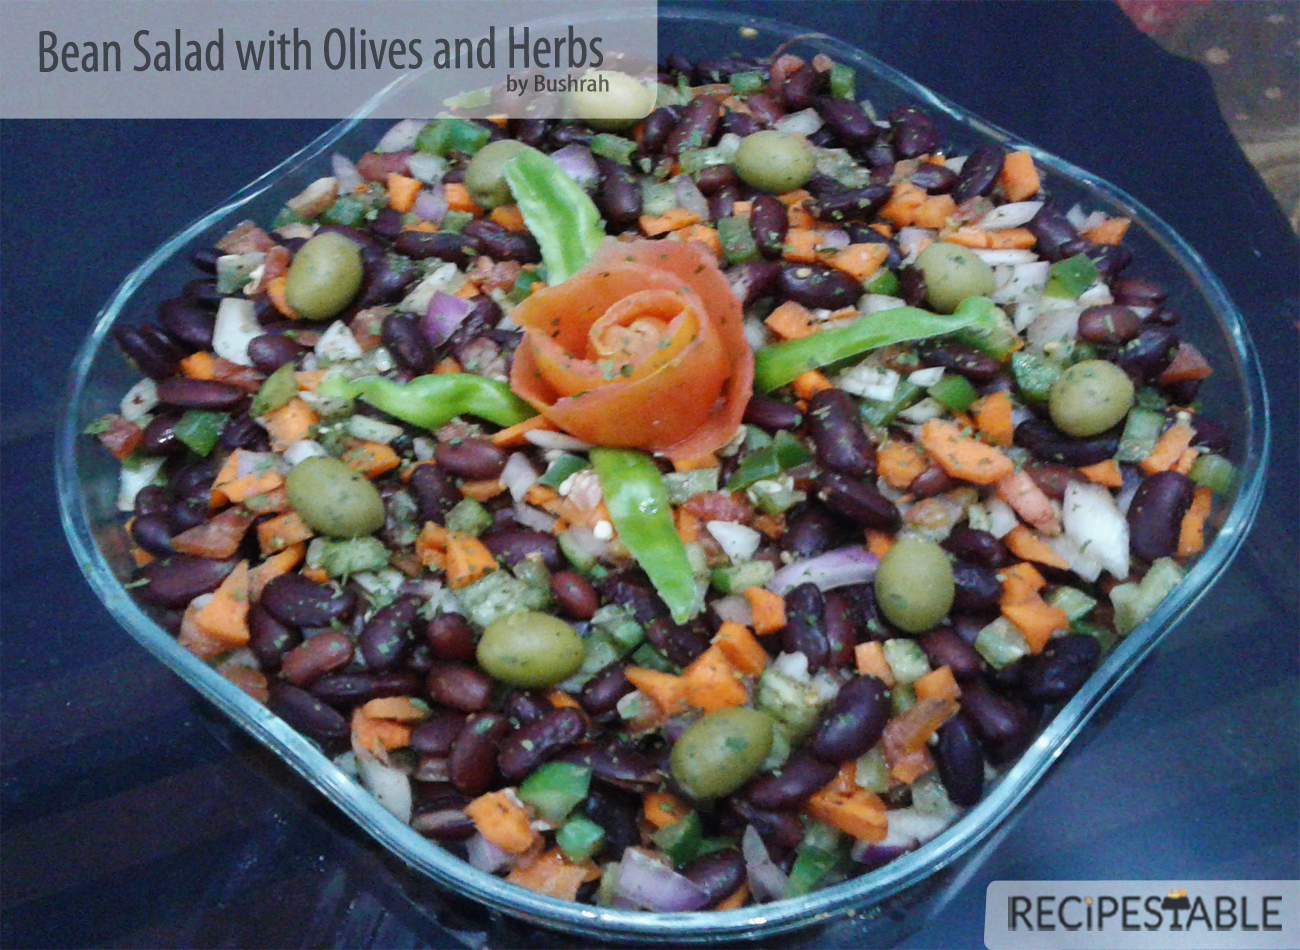 Bean Salad with Olives and Herbs